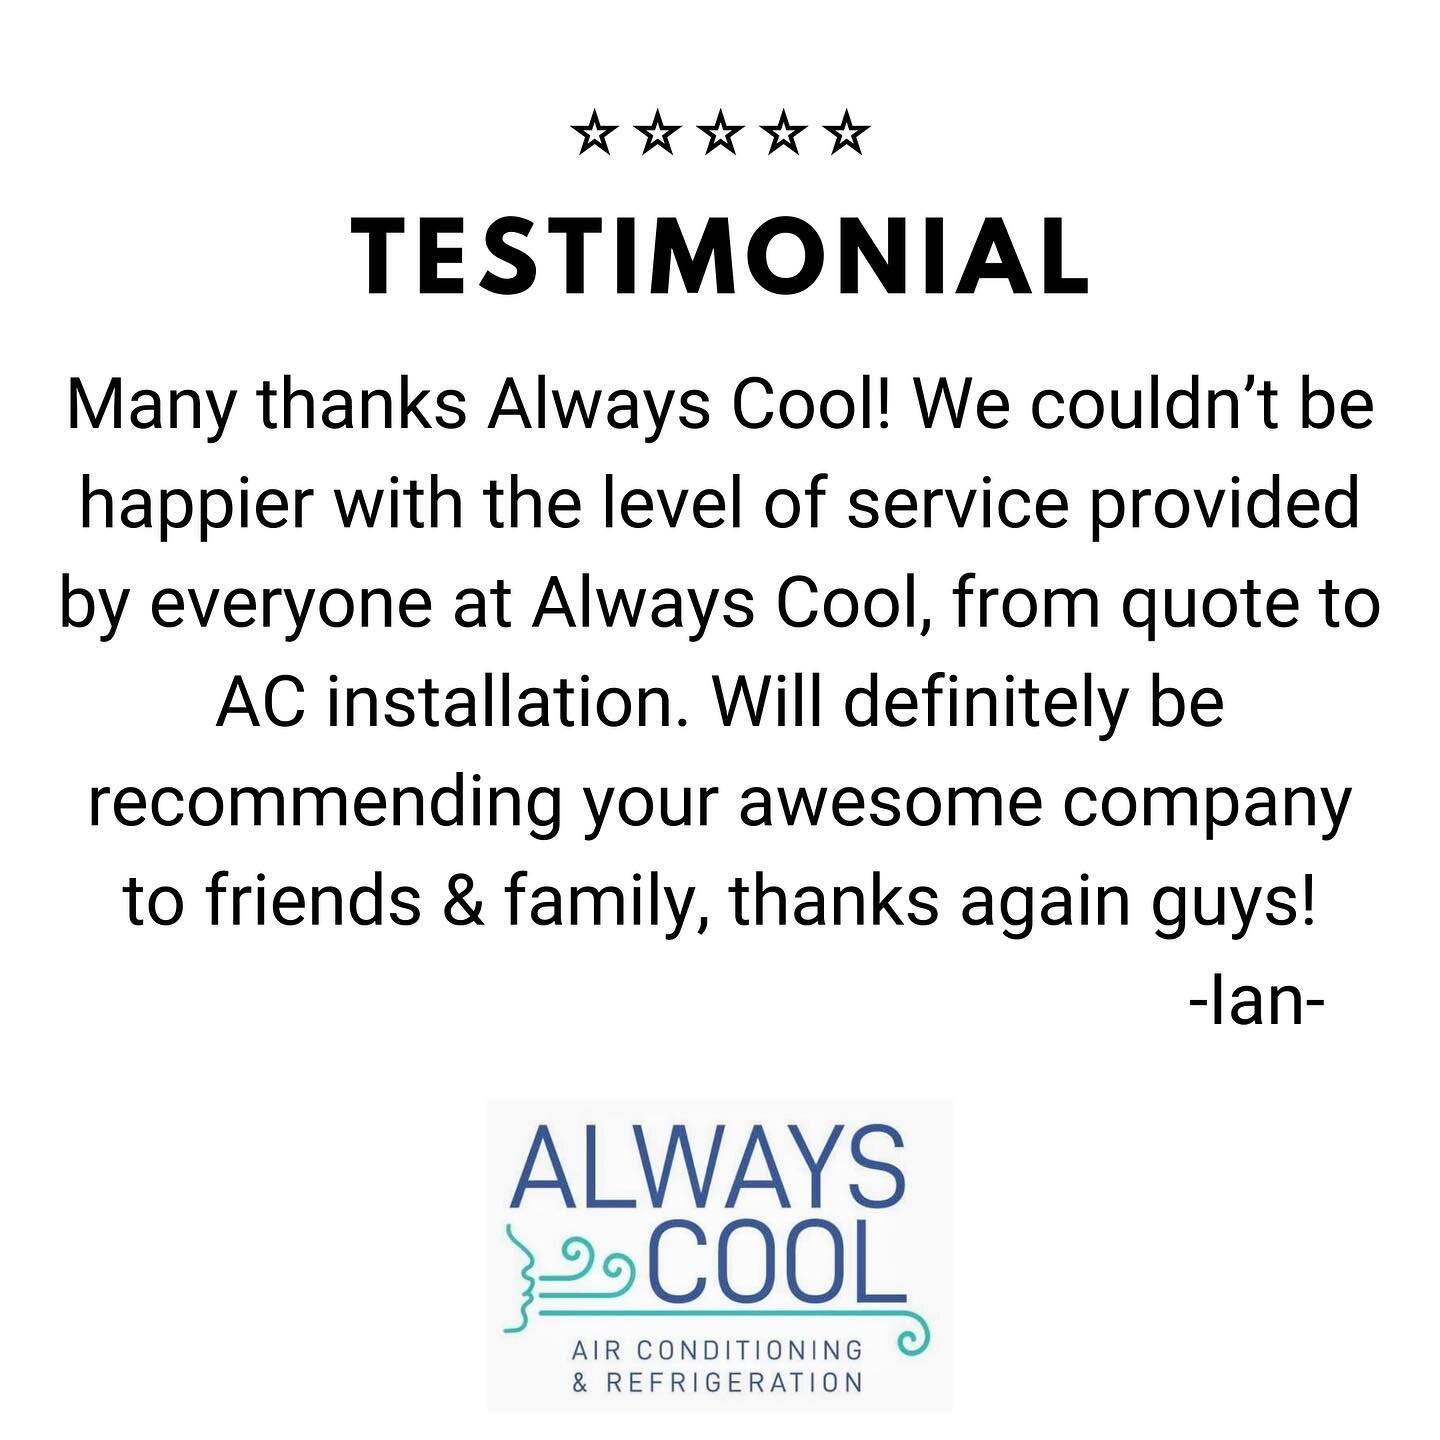 //Customer reviews make our day//

Thank you Ian for taking the time to give us this fantastic review, we really do appreciate it!

You've made our day☀️

All the very best from the Always Cool team!

#alwayscoolairconditioning #alwayscool #testimoni